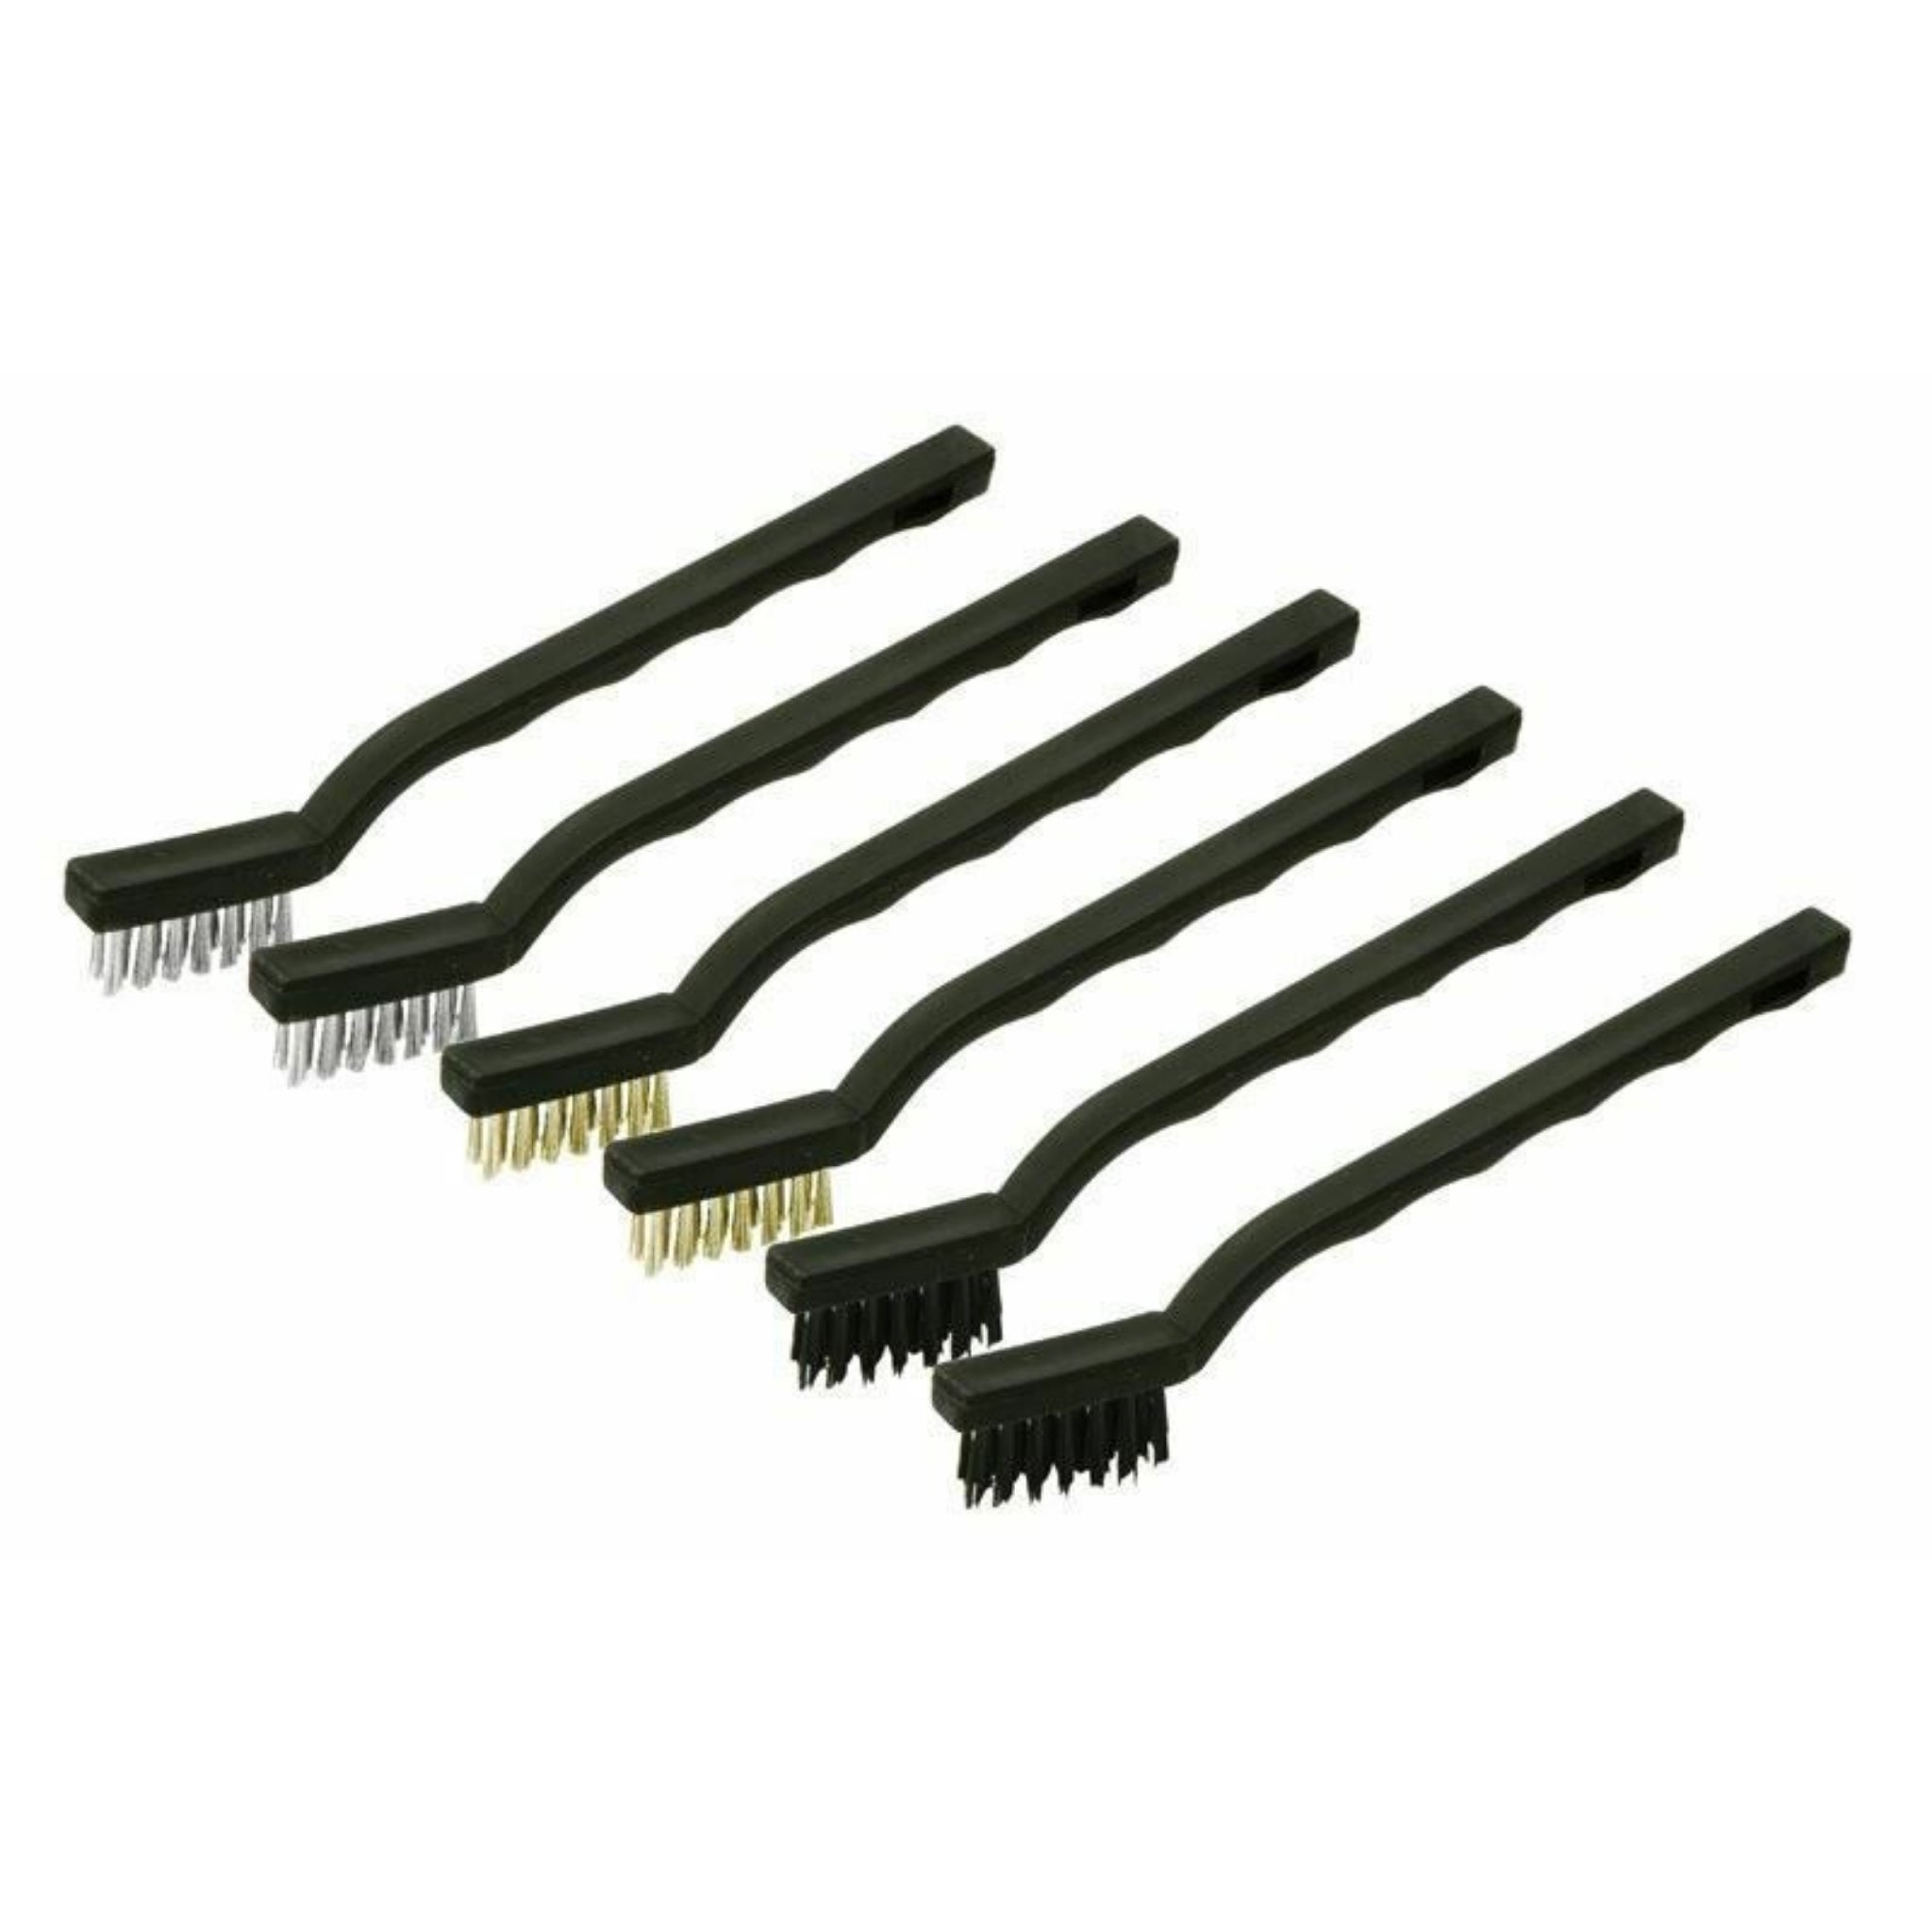 Beclen Harp 6pc Mini Stainless Steel/Nylon/Brass Wire Bristle Rush Removal Brush Set-Perfect Cleaning Tool SM